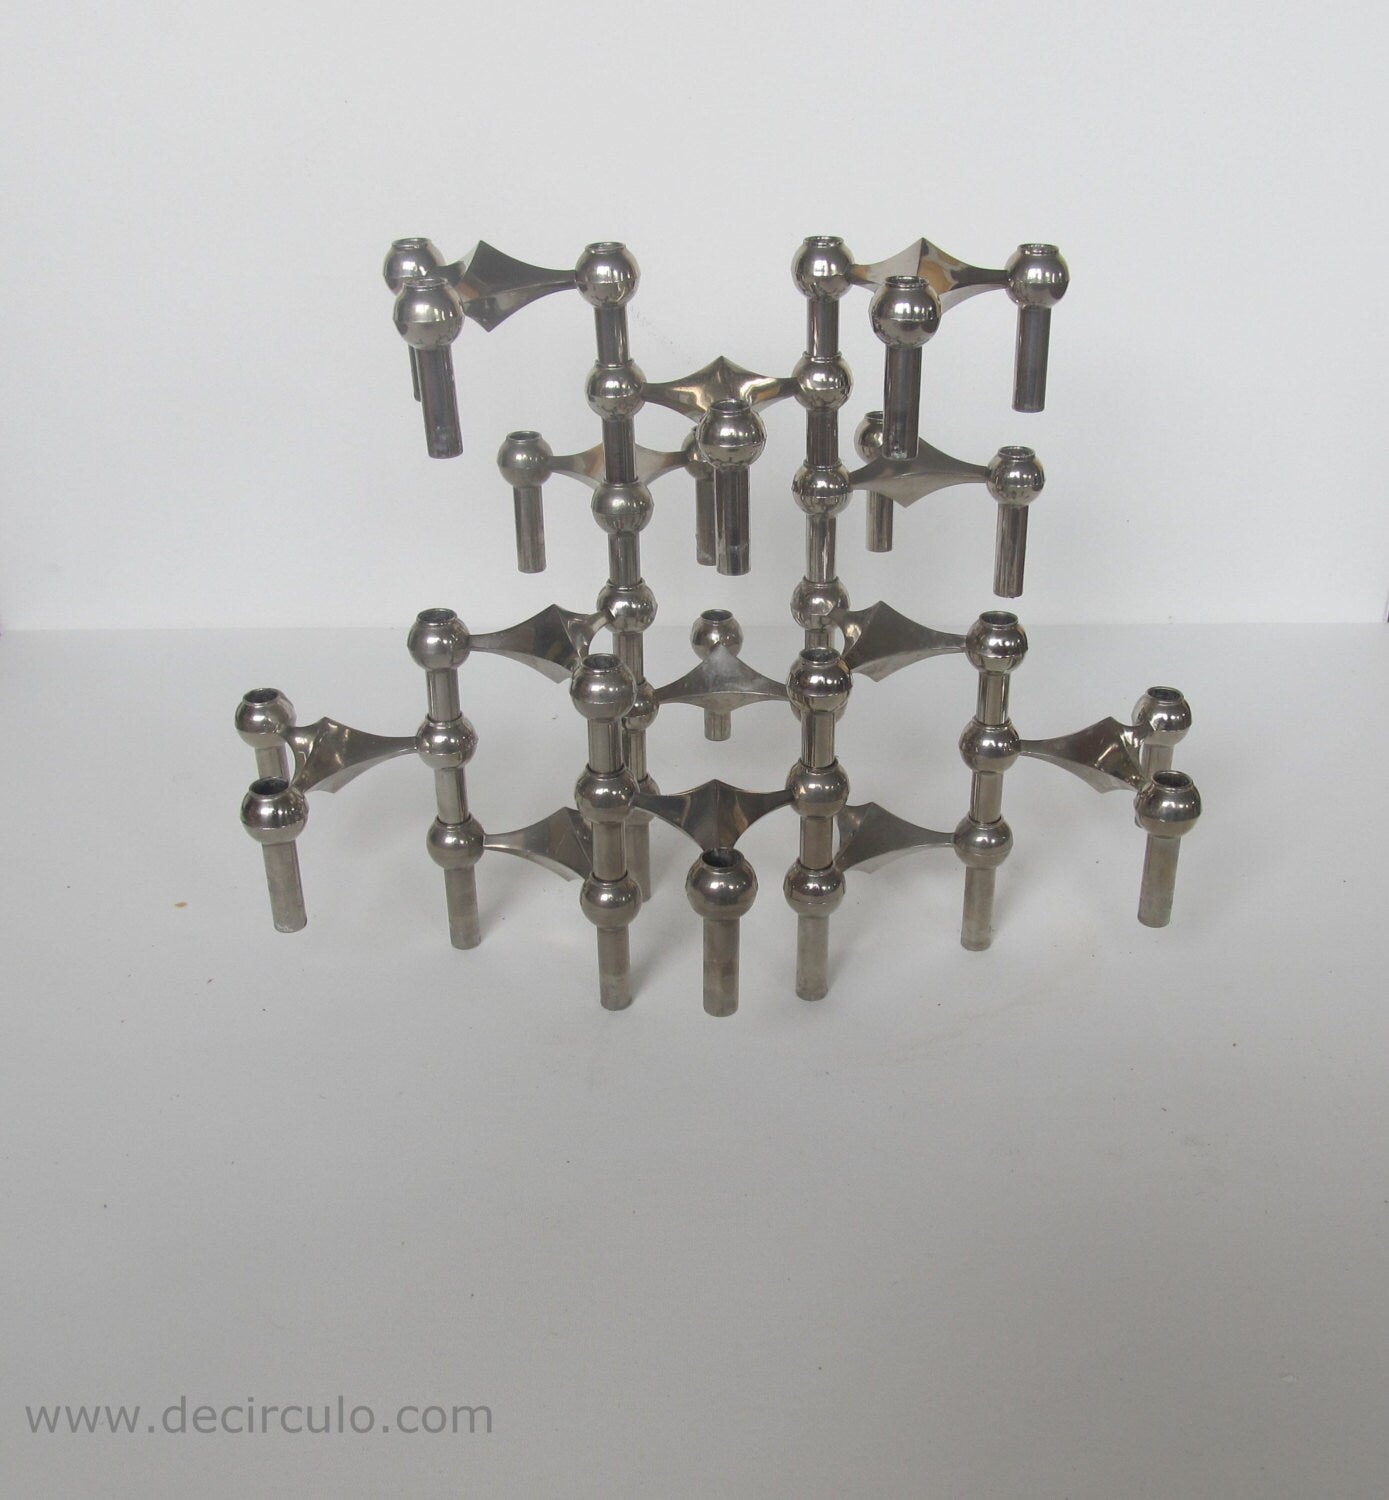 12 Candle holders S22 designed by Ceasar Stoffi and Fritz Nagel and manufactured by BMF Set of 12 & stackable